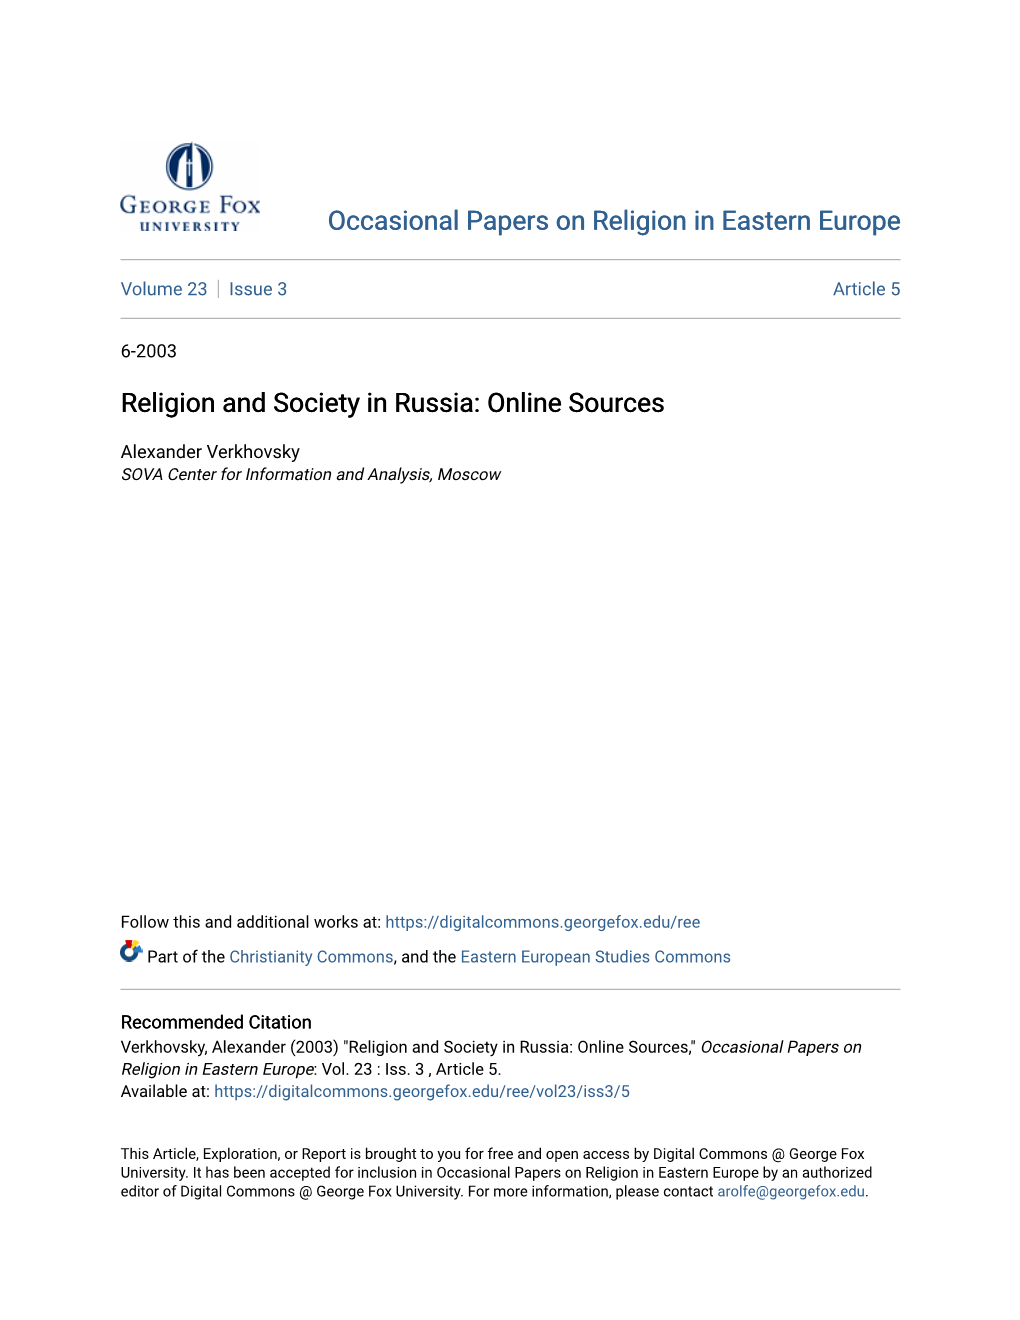 Religion and Society in Russia: Online Sources